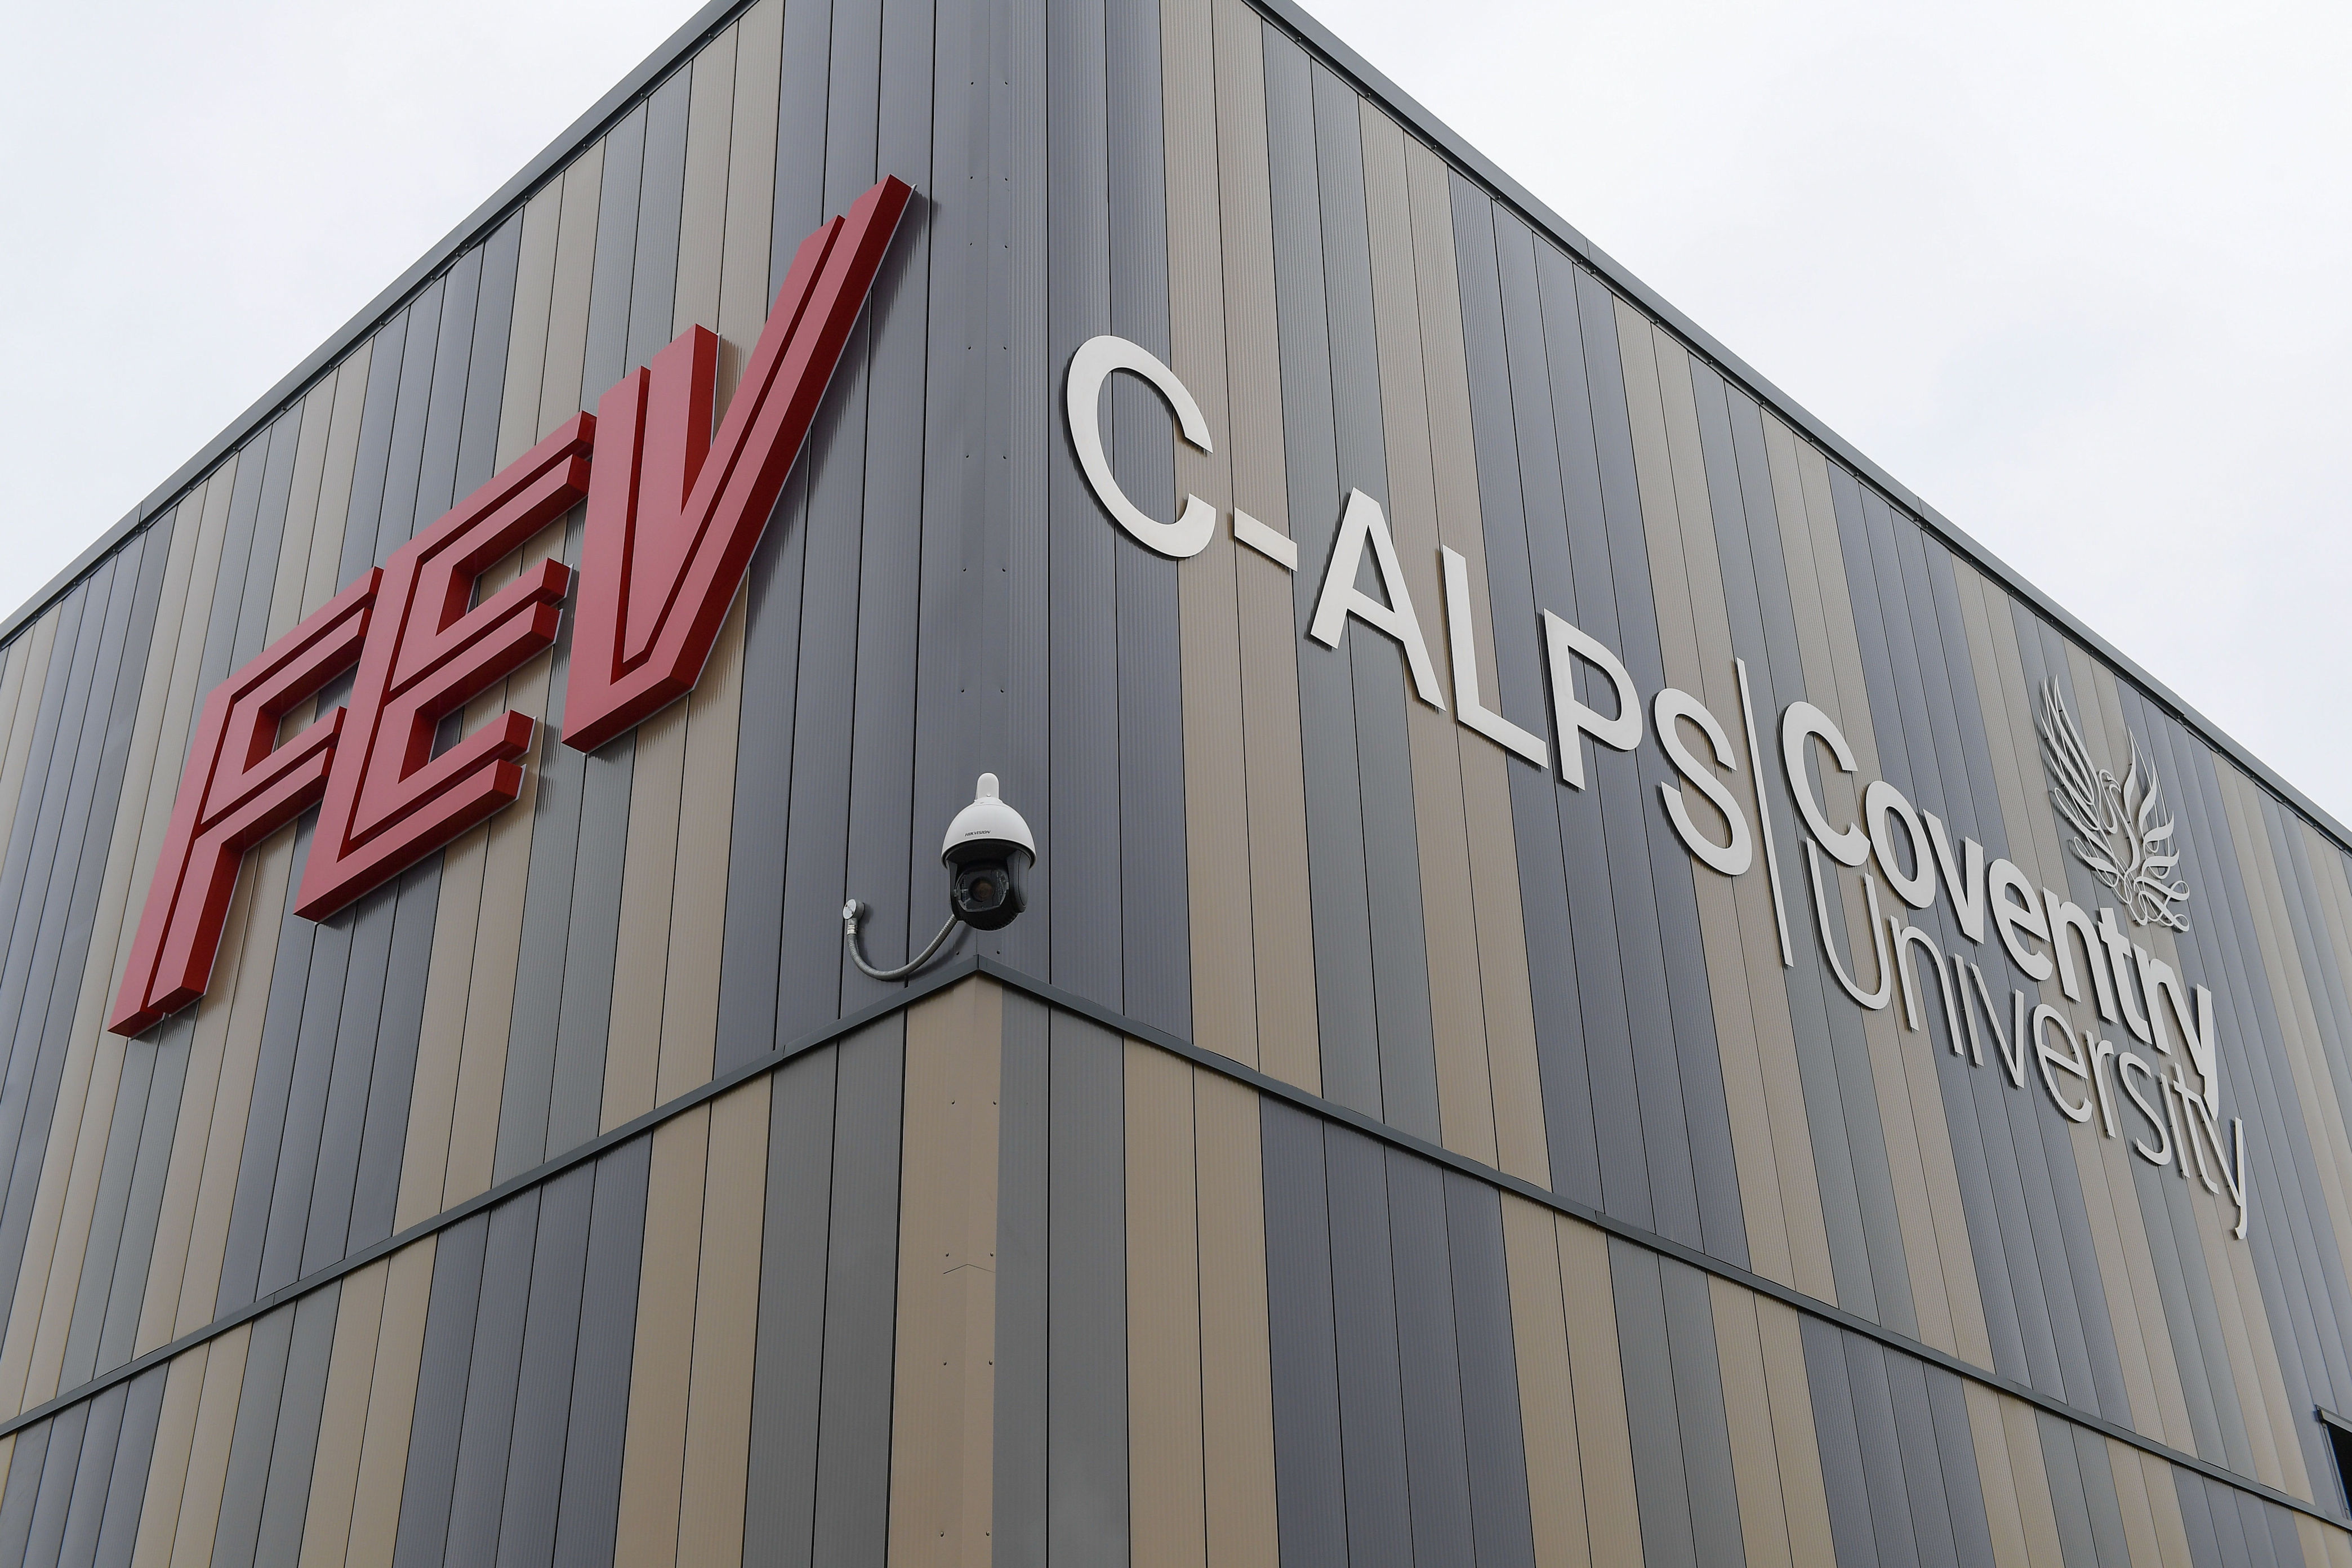 Coventry University - CALPS exterior sign close up mid.jpg